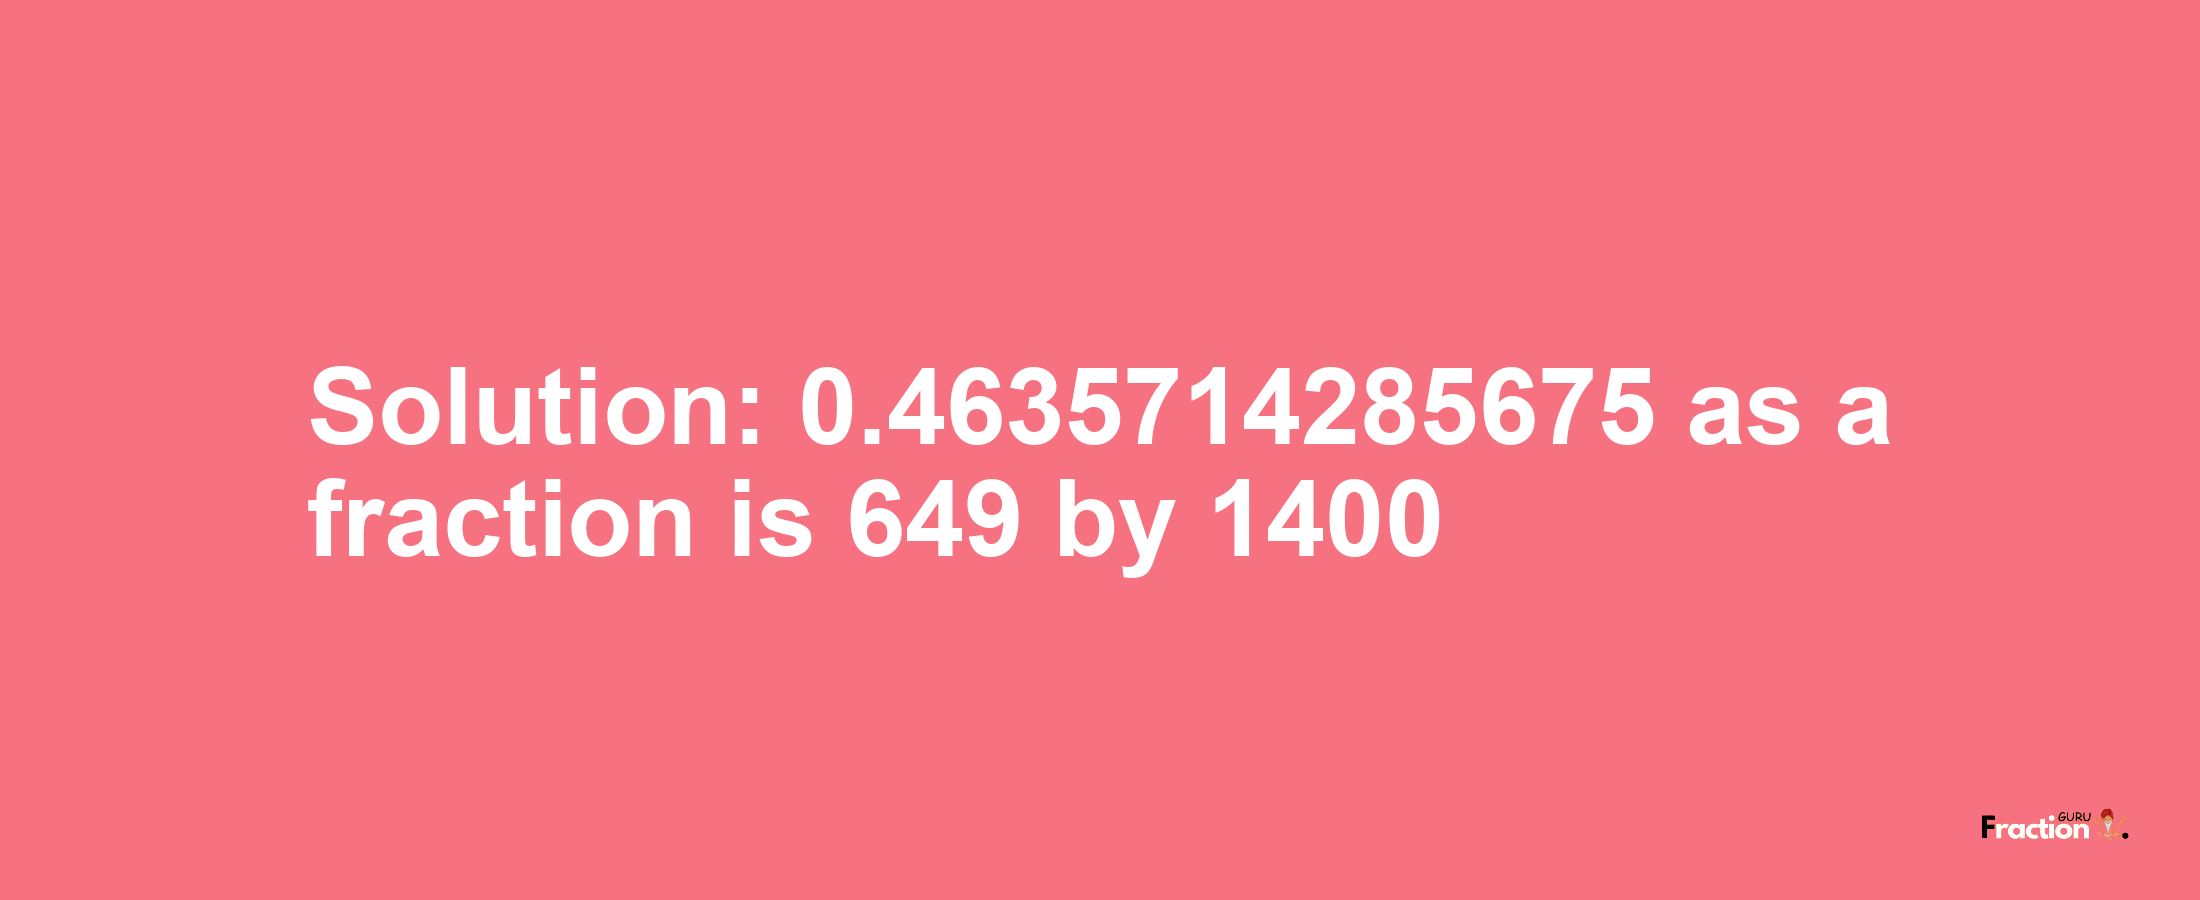 Solution:0.4635714285675 as a fraction is 649/1400